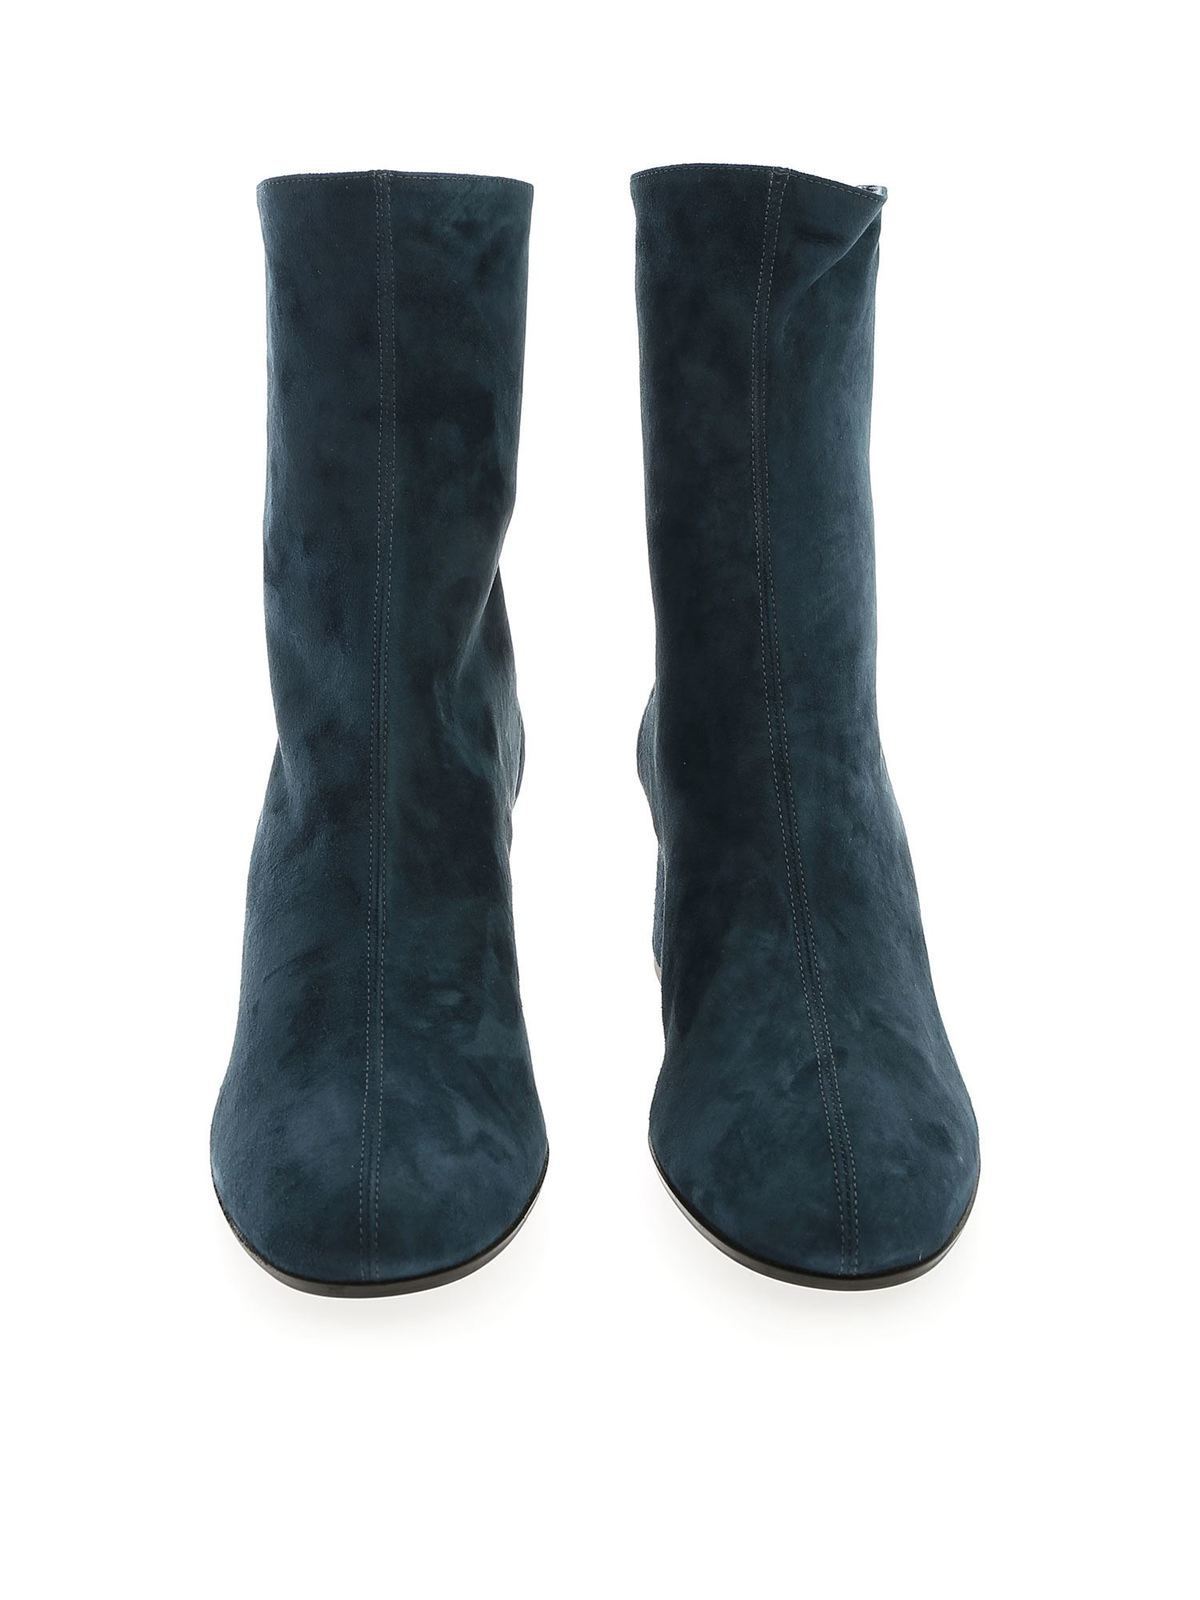 teal boots